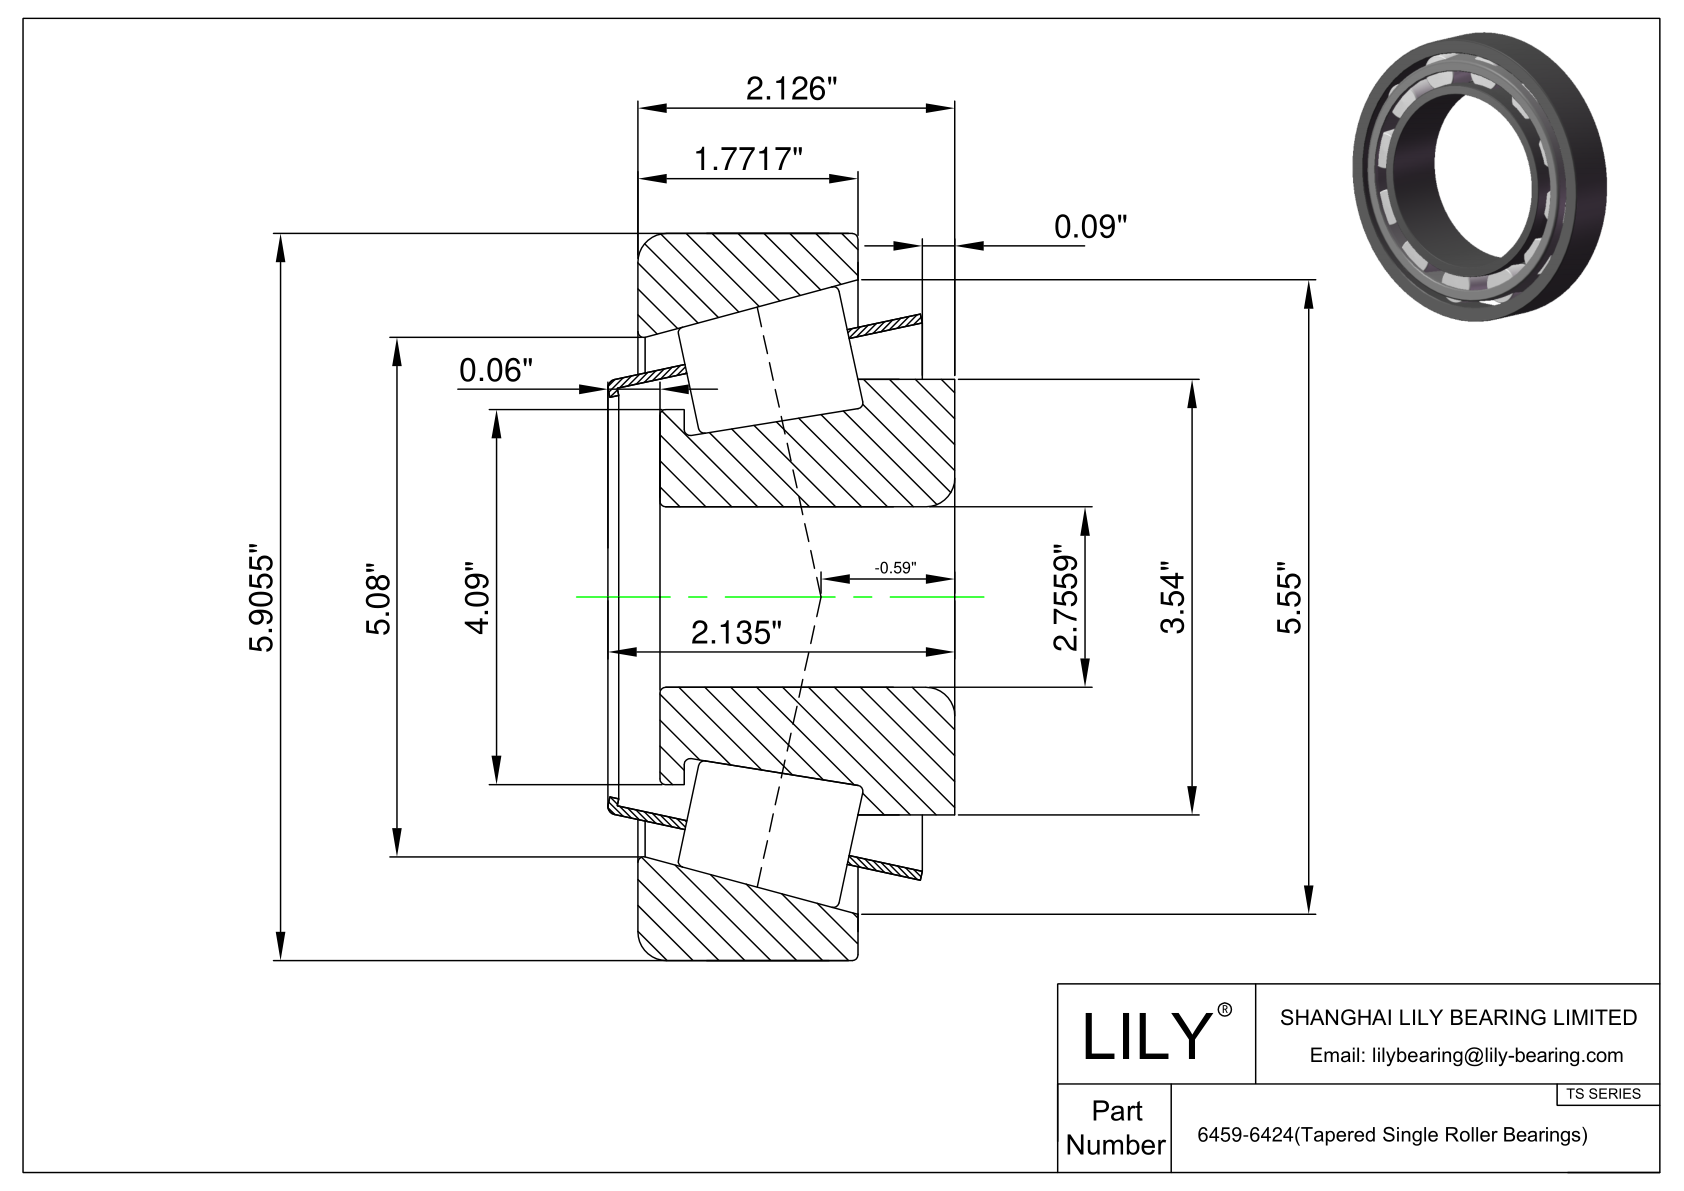 6459-6424 TS (Tapered Single Roller Bearings) (Imperial) cad drawing